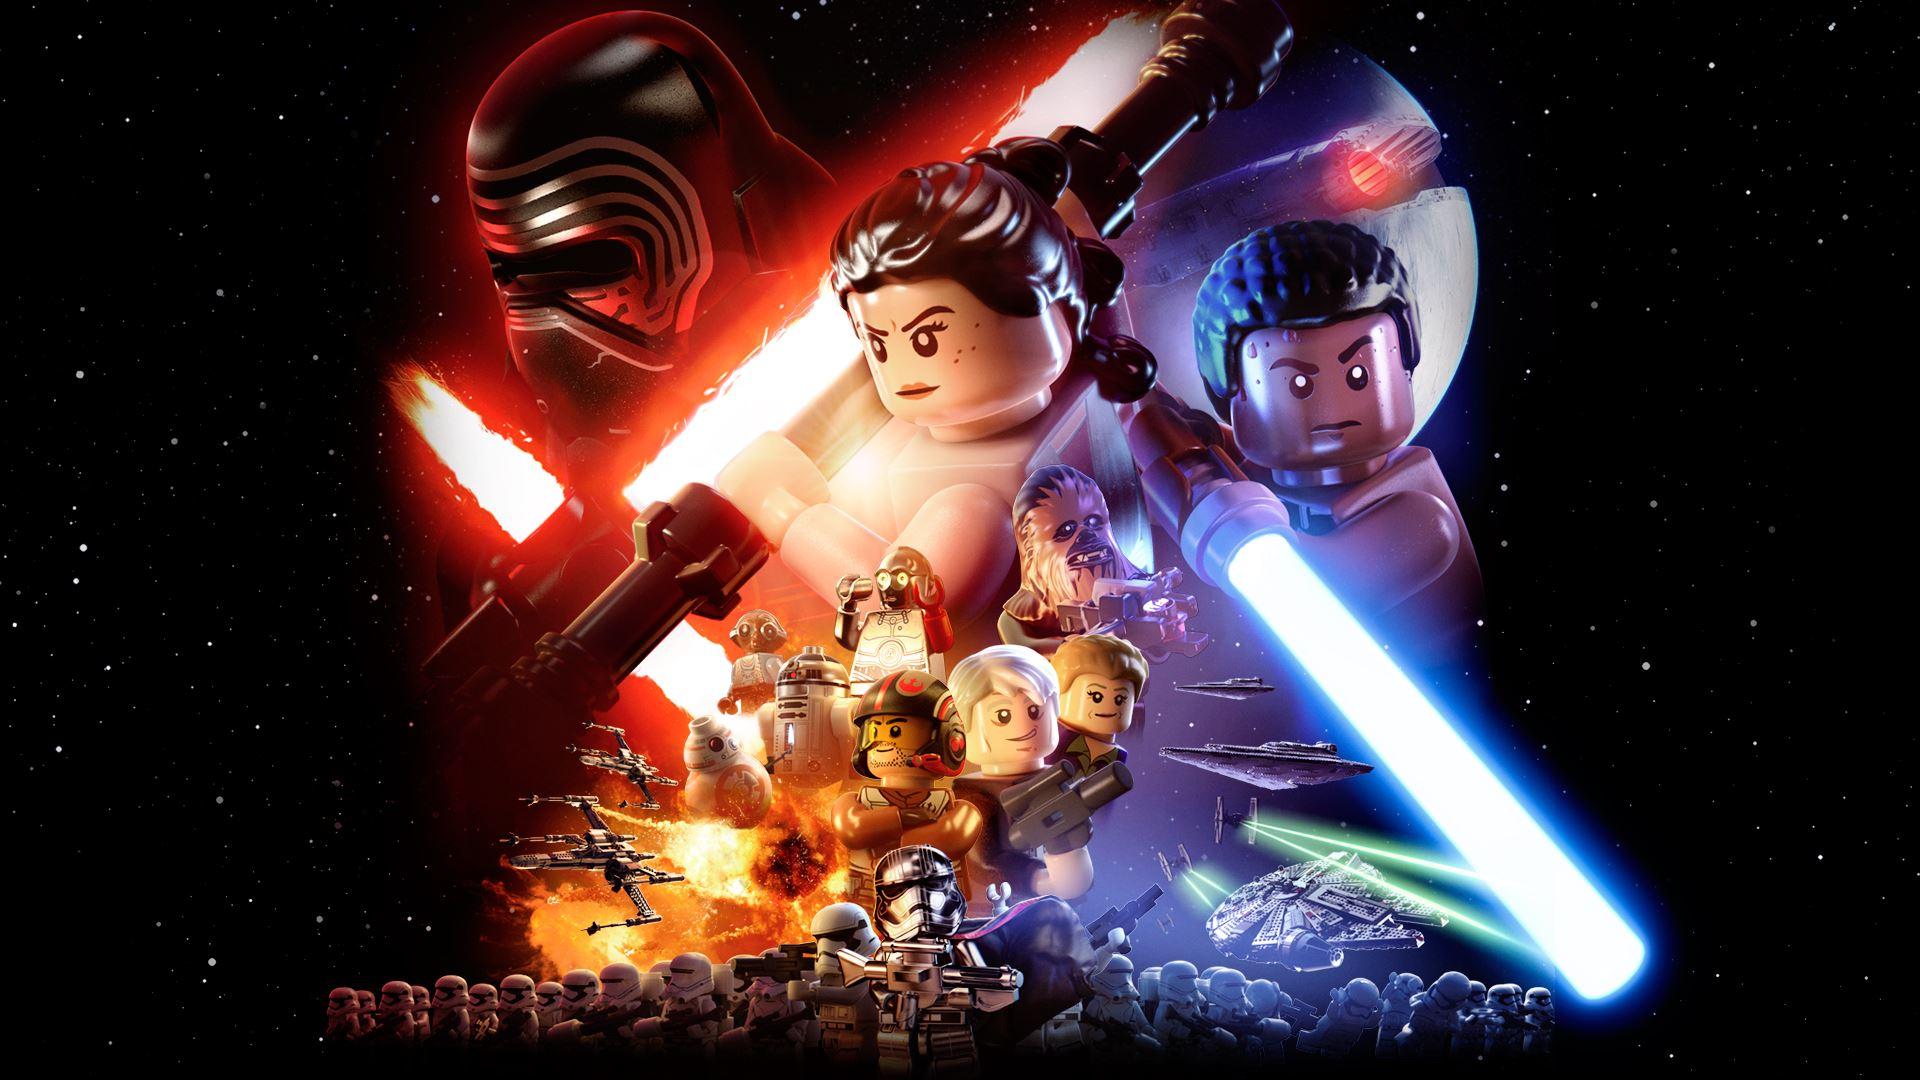 LEGO Star Wars: The Force Awakens Full HD Wallpaper and Background